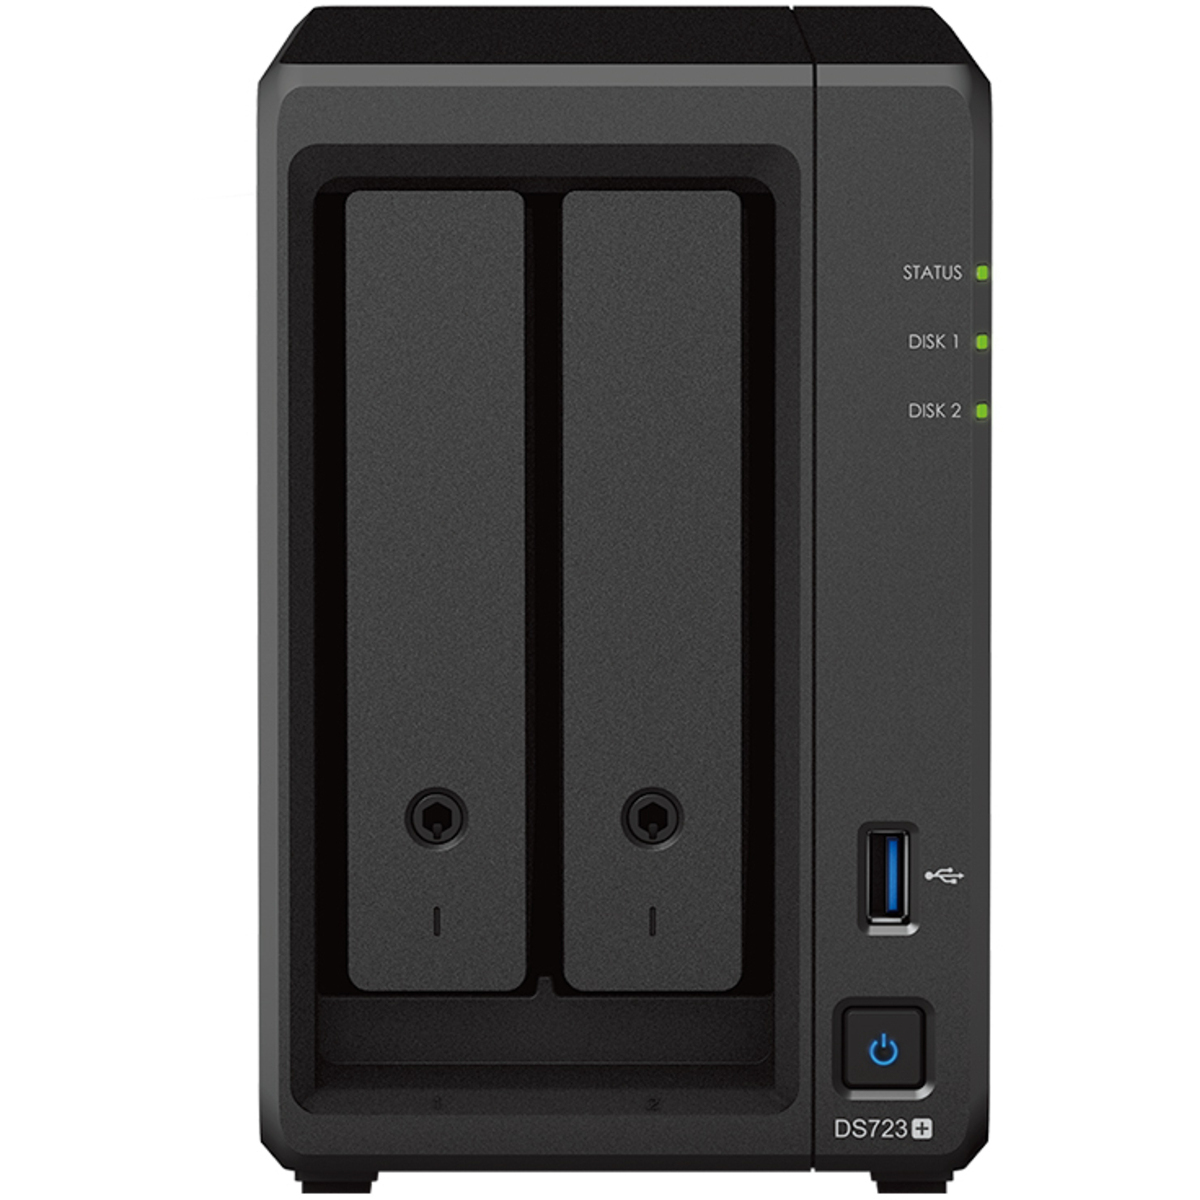 Synology DiskStation DS723+ 24tb 2-Bay Desktop Multimedia / Power User / Business NAS - Network Attached Storage Device 1x24tb Western Digital Gold WD241KRYZ 3.5 7200rpm SATA 6Gb/s HDD ENTERPRISE Class Drives Installed - Burn-In Tested DiskStation DS723+